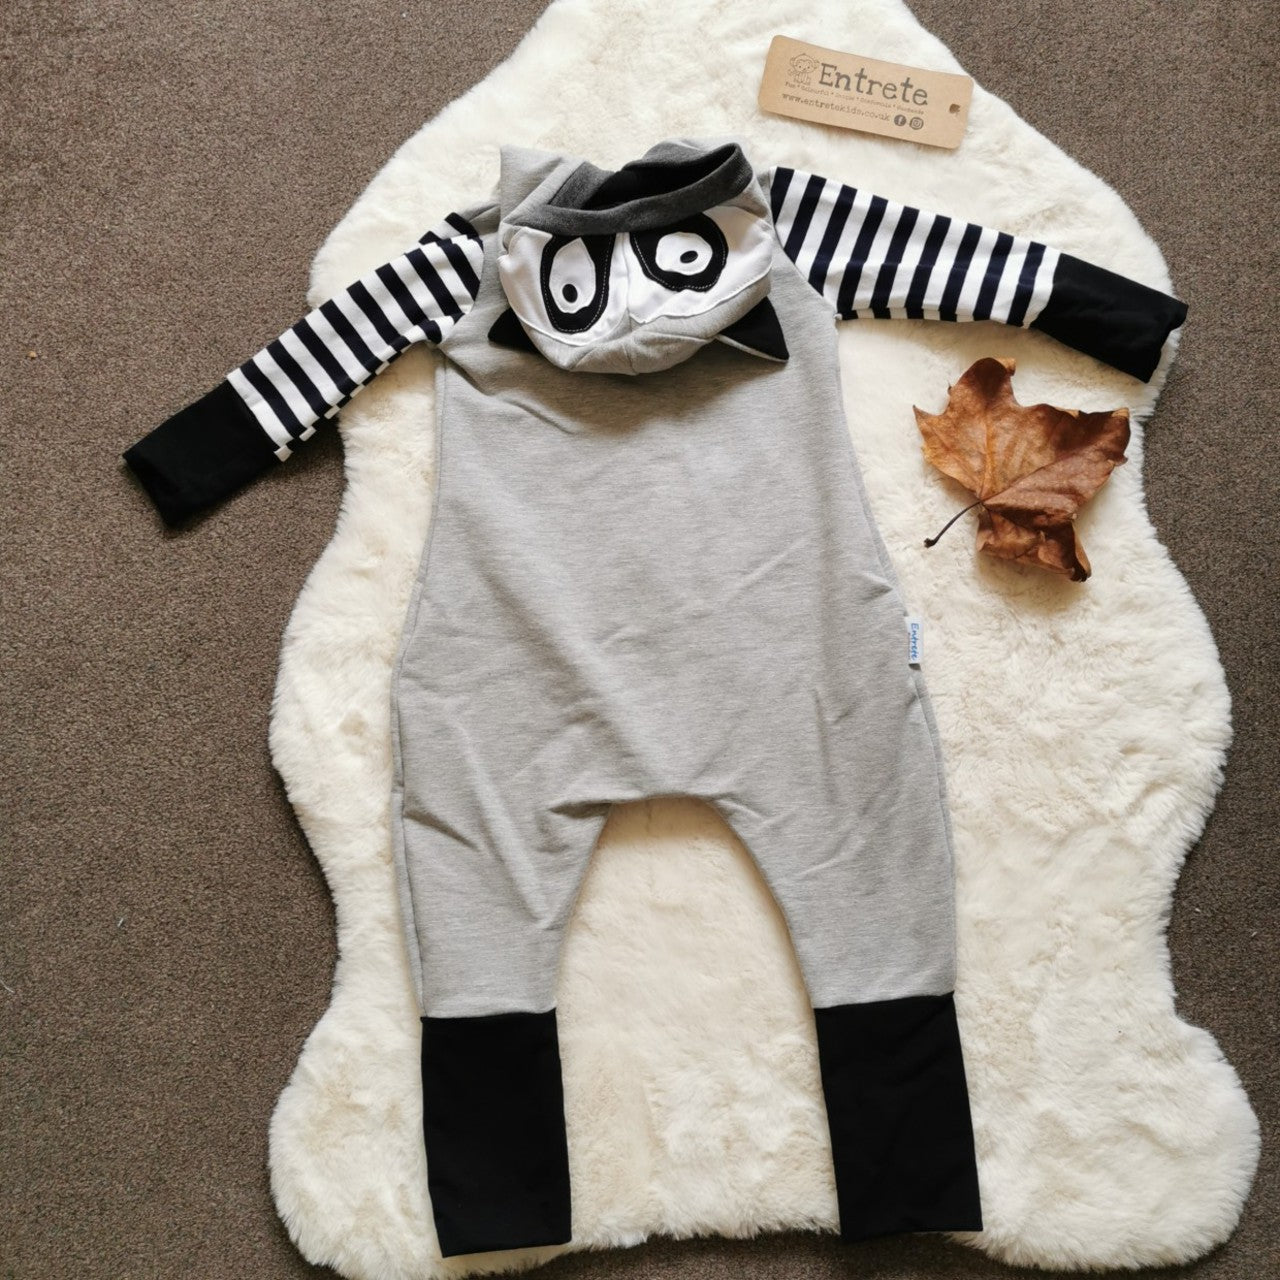 Rear view of The super fun Raccoon romper has lots of intricate detailing, your little one will love being a Raccoon! Handmade using grey cotton sweat fabric, monochrome striped, white and black cotton jerseys' and graphite cotton ribbing.